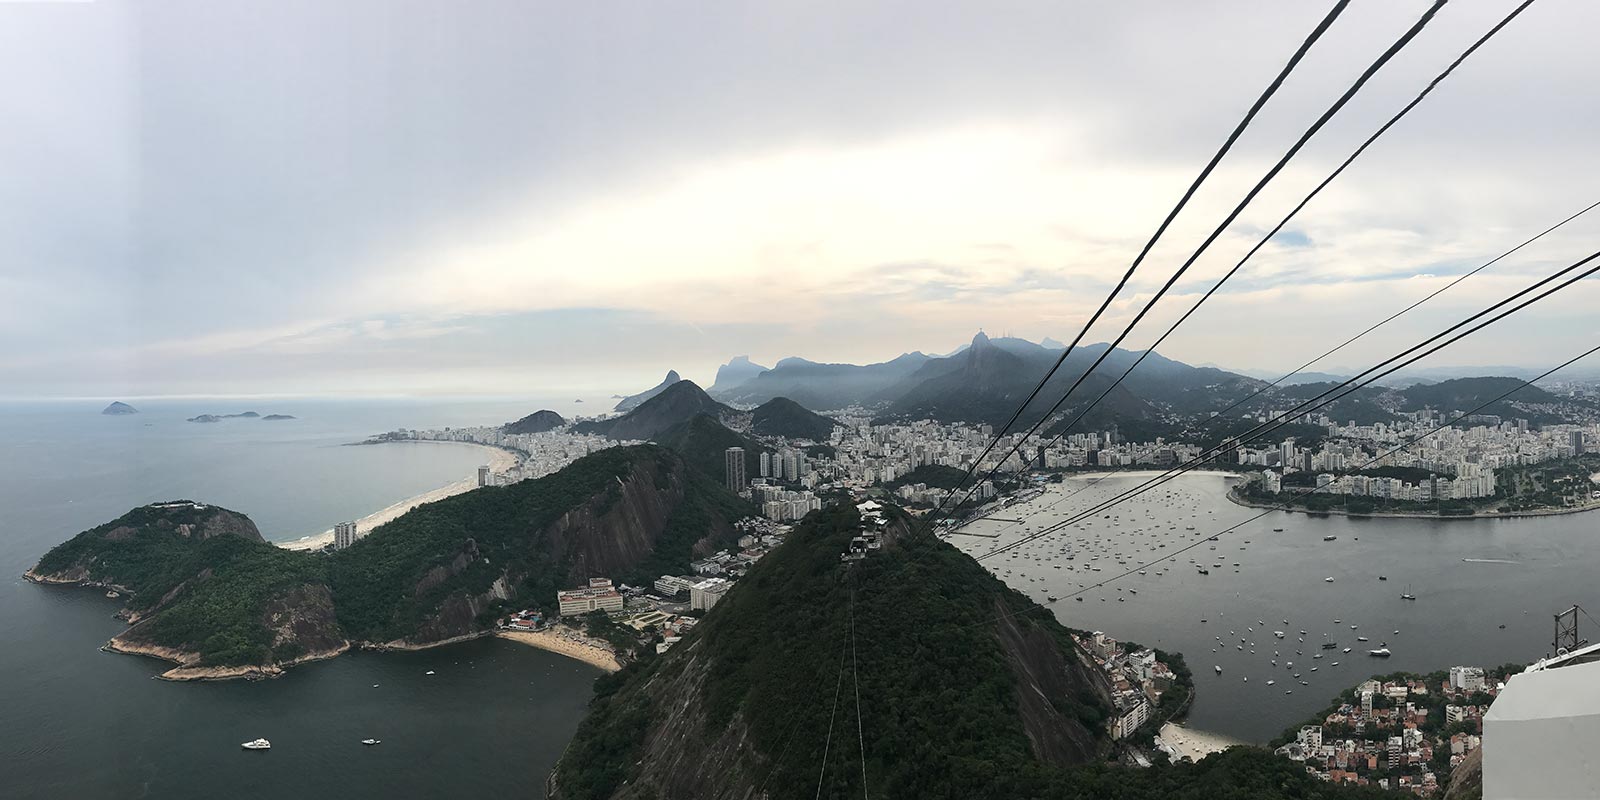 Cable car ride to the top of Sugarloaf Mountain in Rio de Janeiro, Brazil. Favelas, Christ & Sugarloaf, my intro to Rio